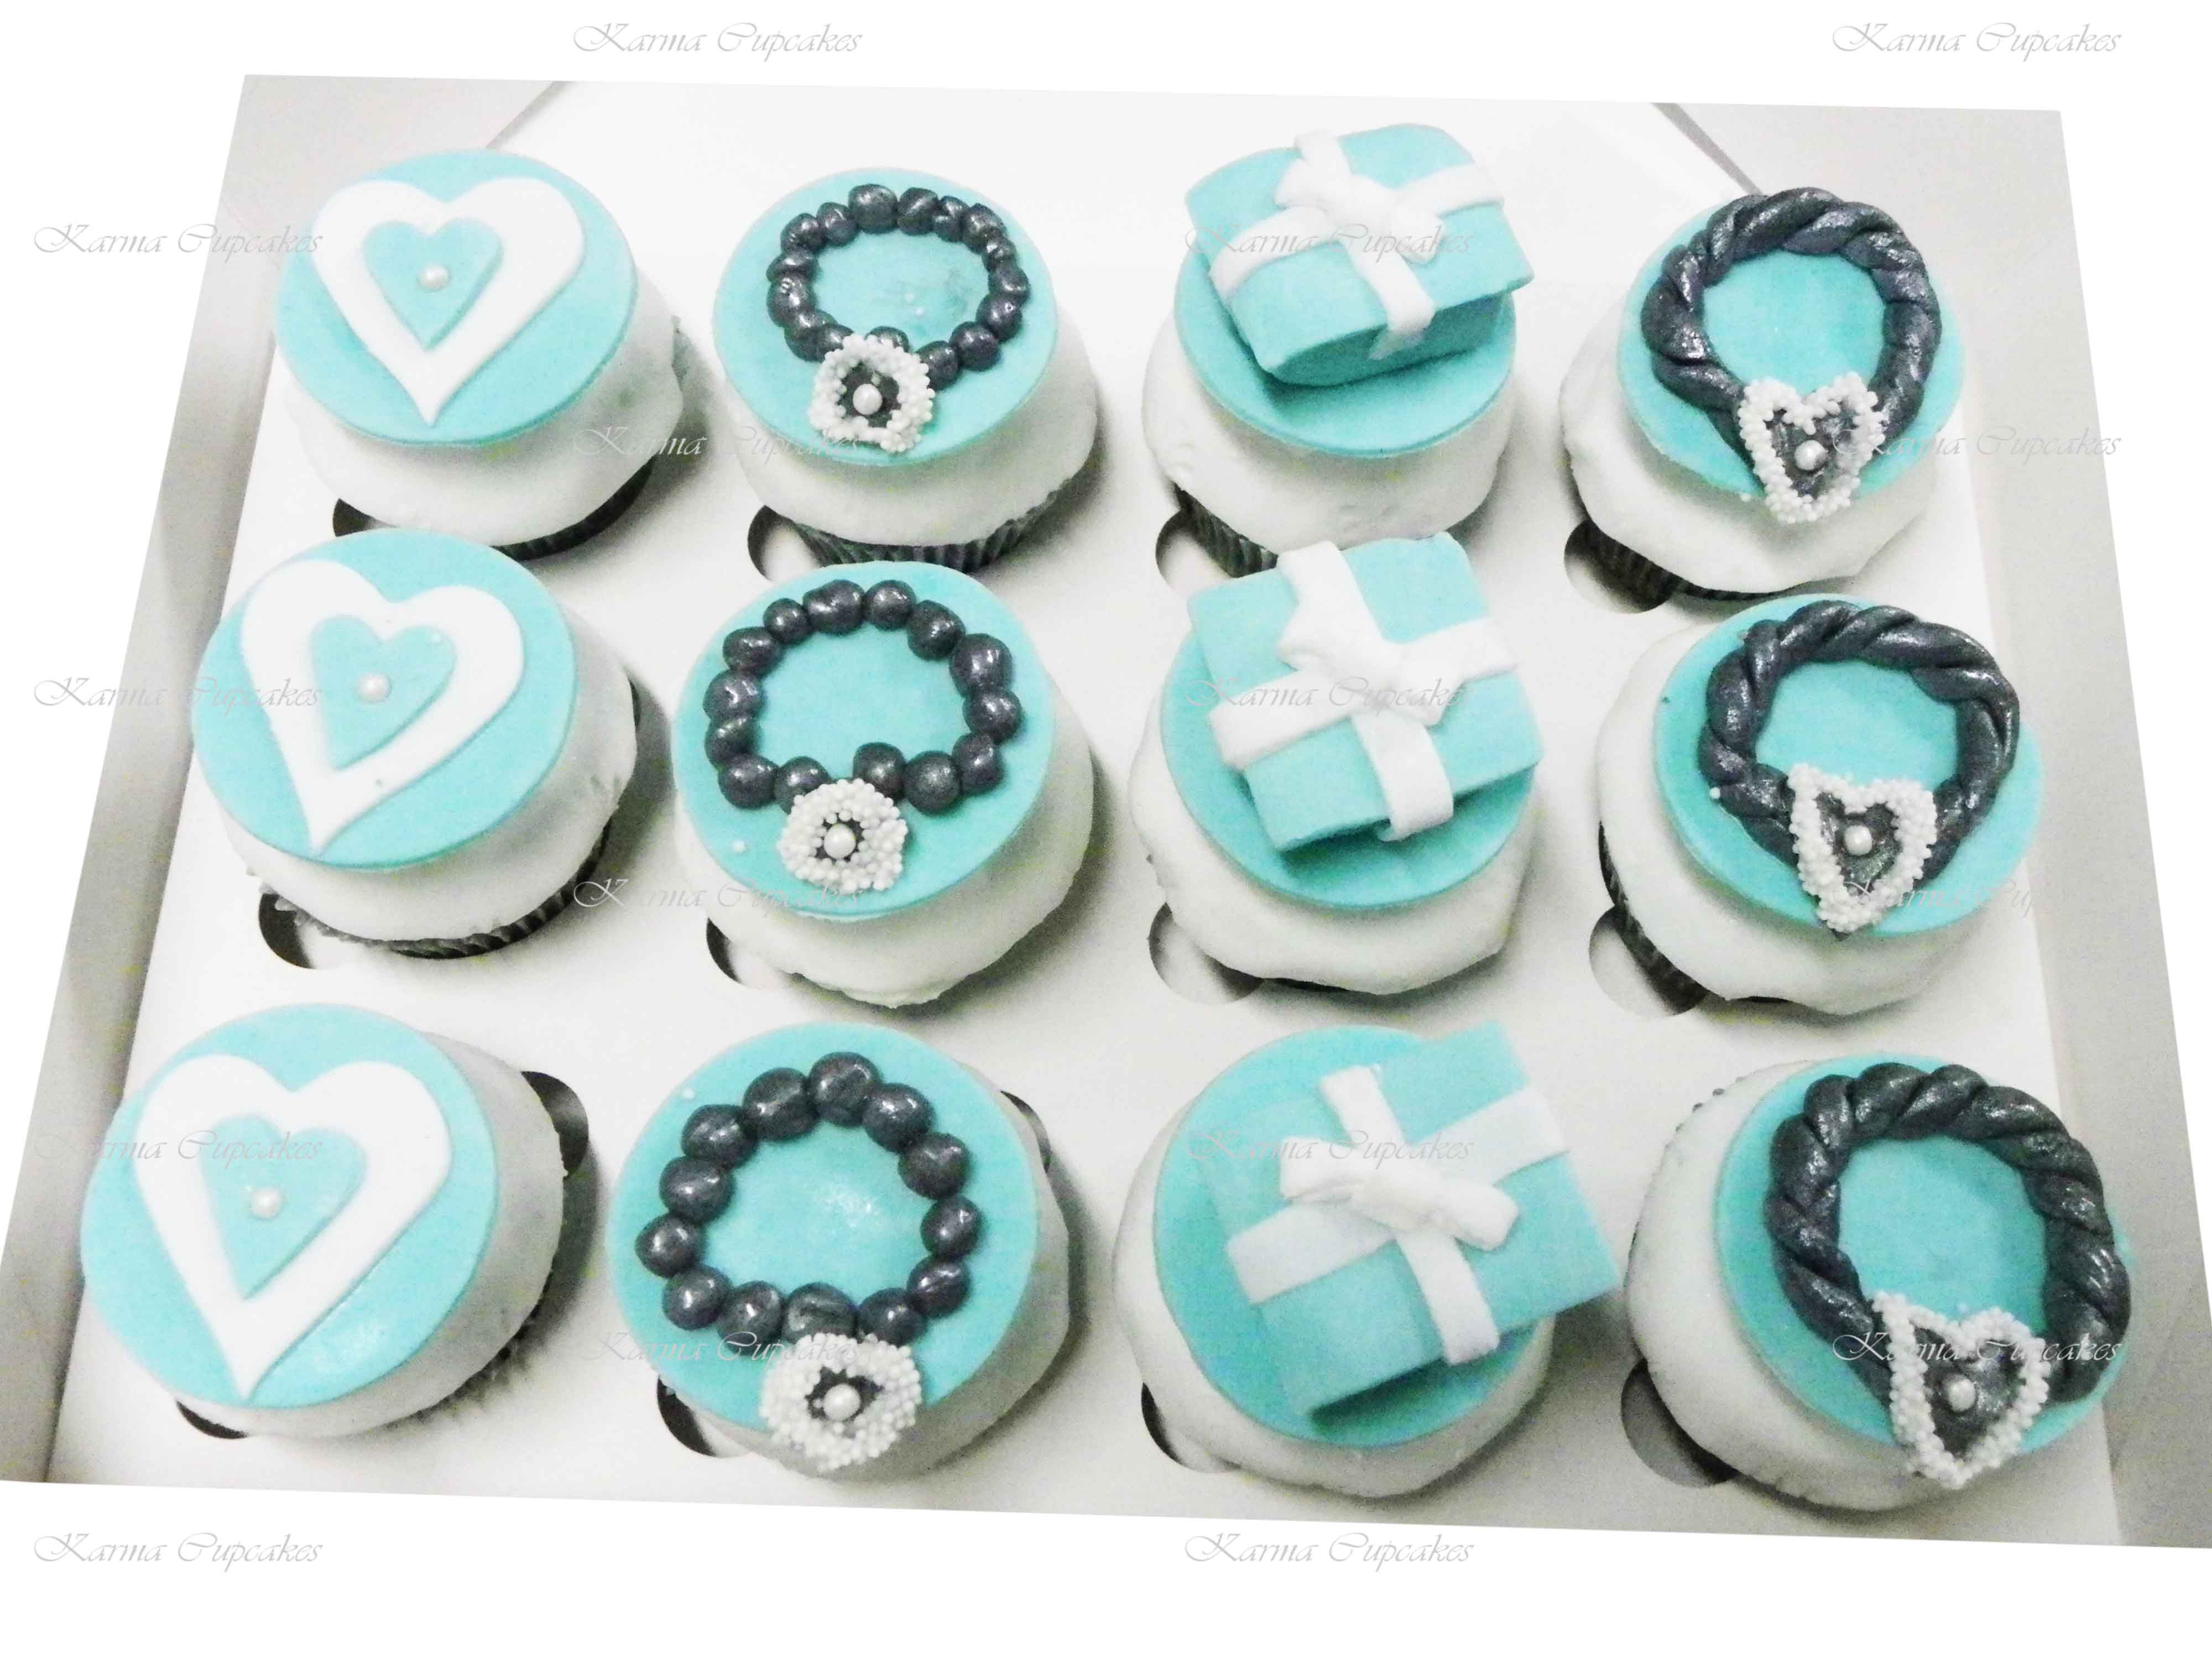 Tiffany & Co Cupcakes with Handmade Jewels